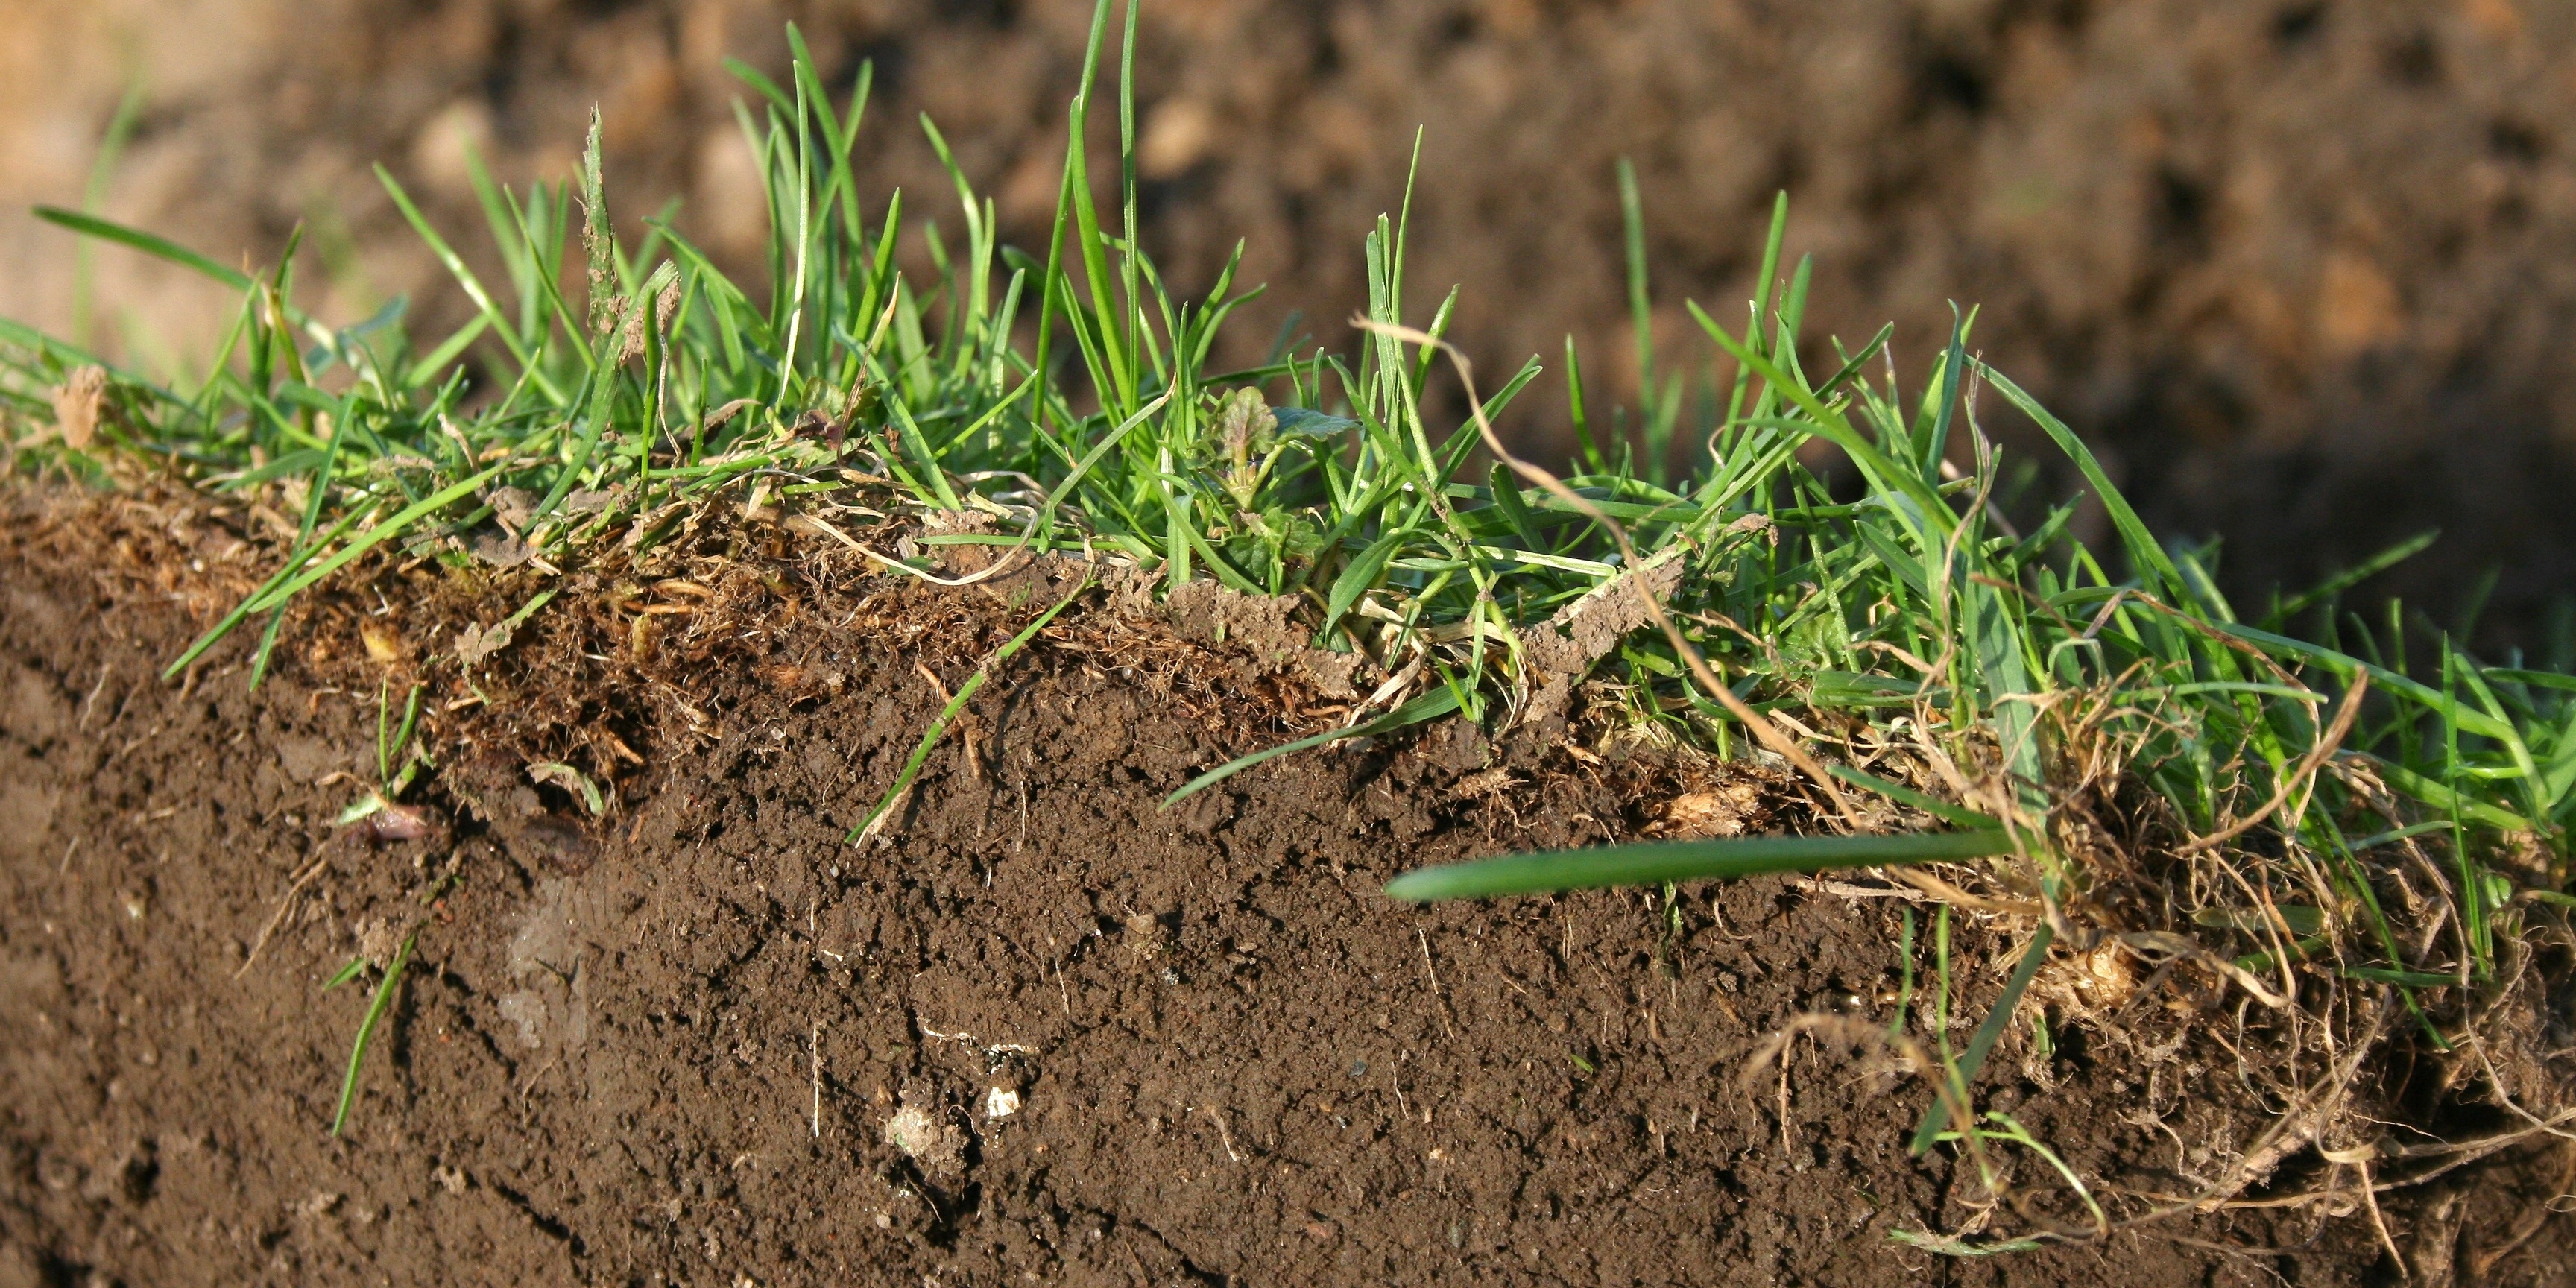 When left untreated, too much thatch can be detrimental to the success of your lawn.